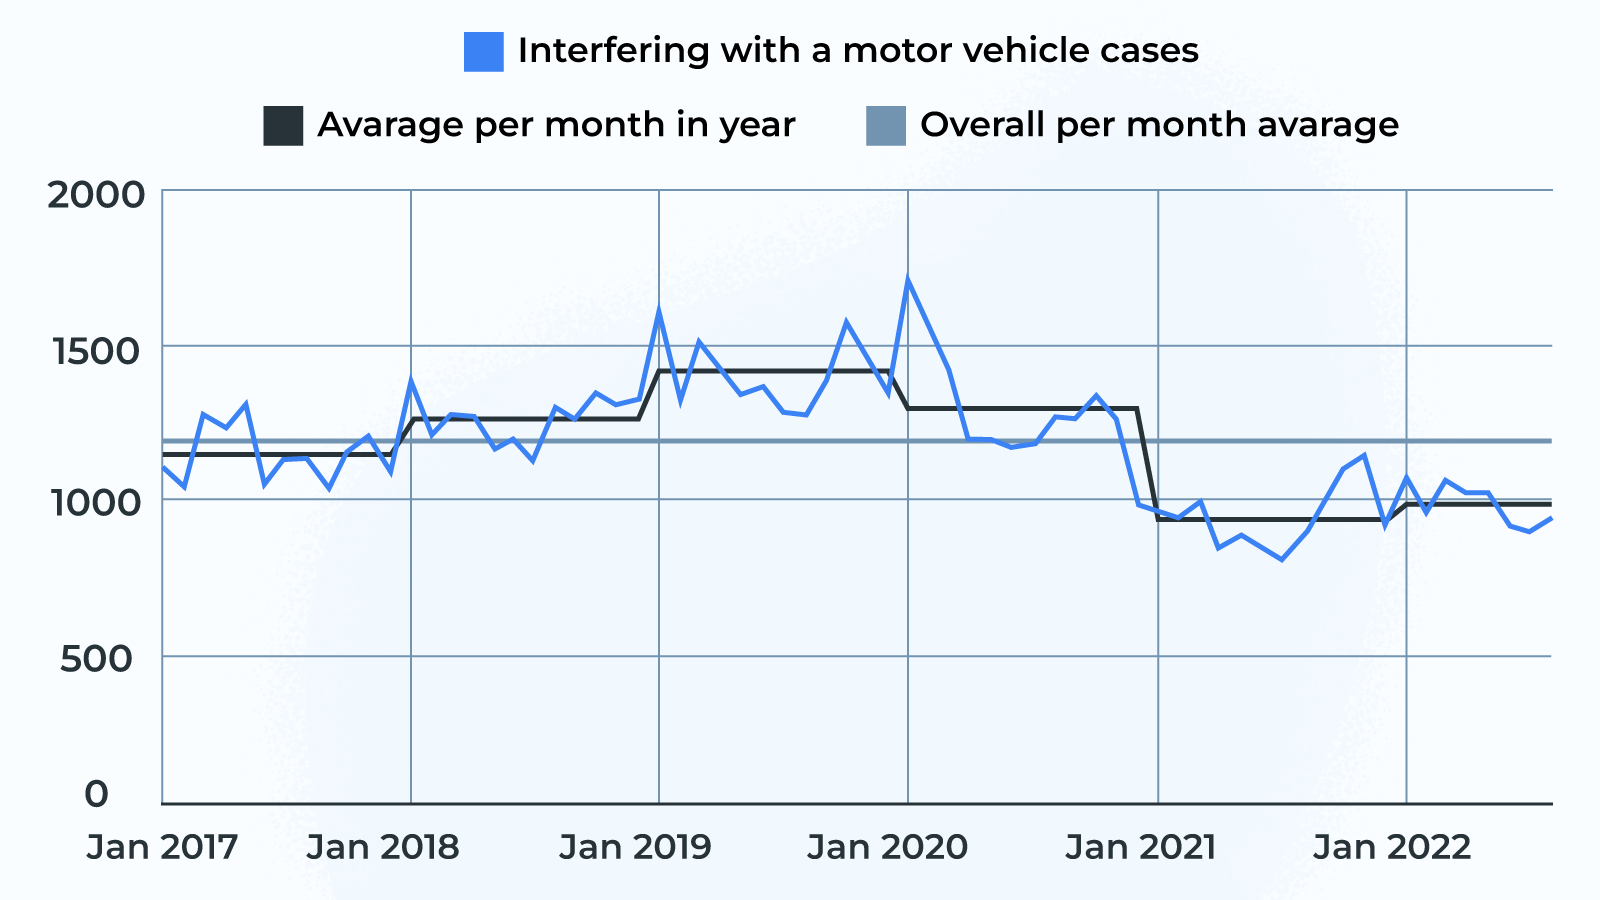 At a glance Change in motor vehicle interference cases